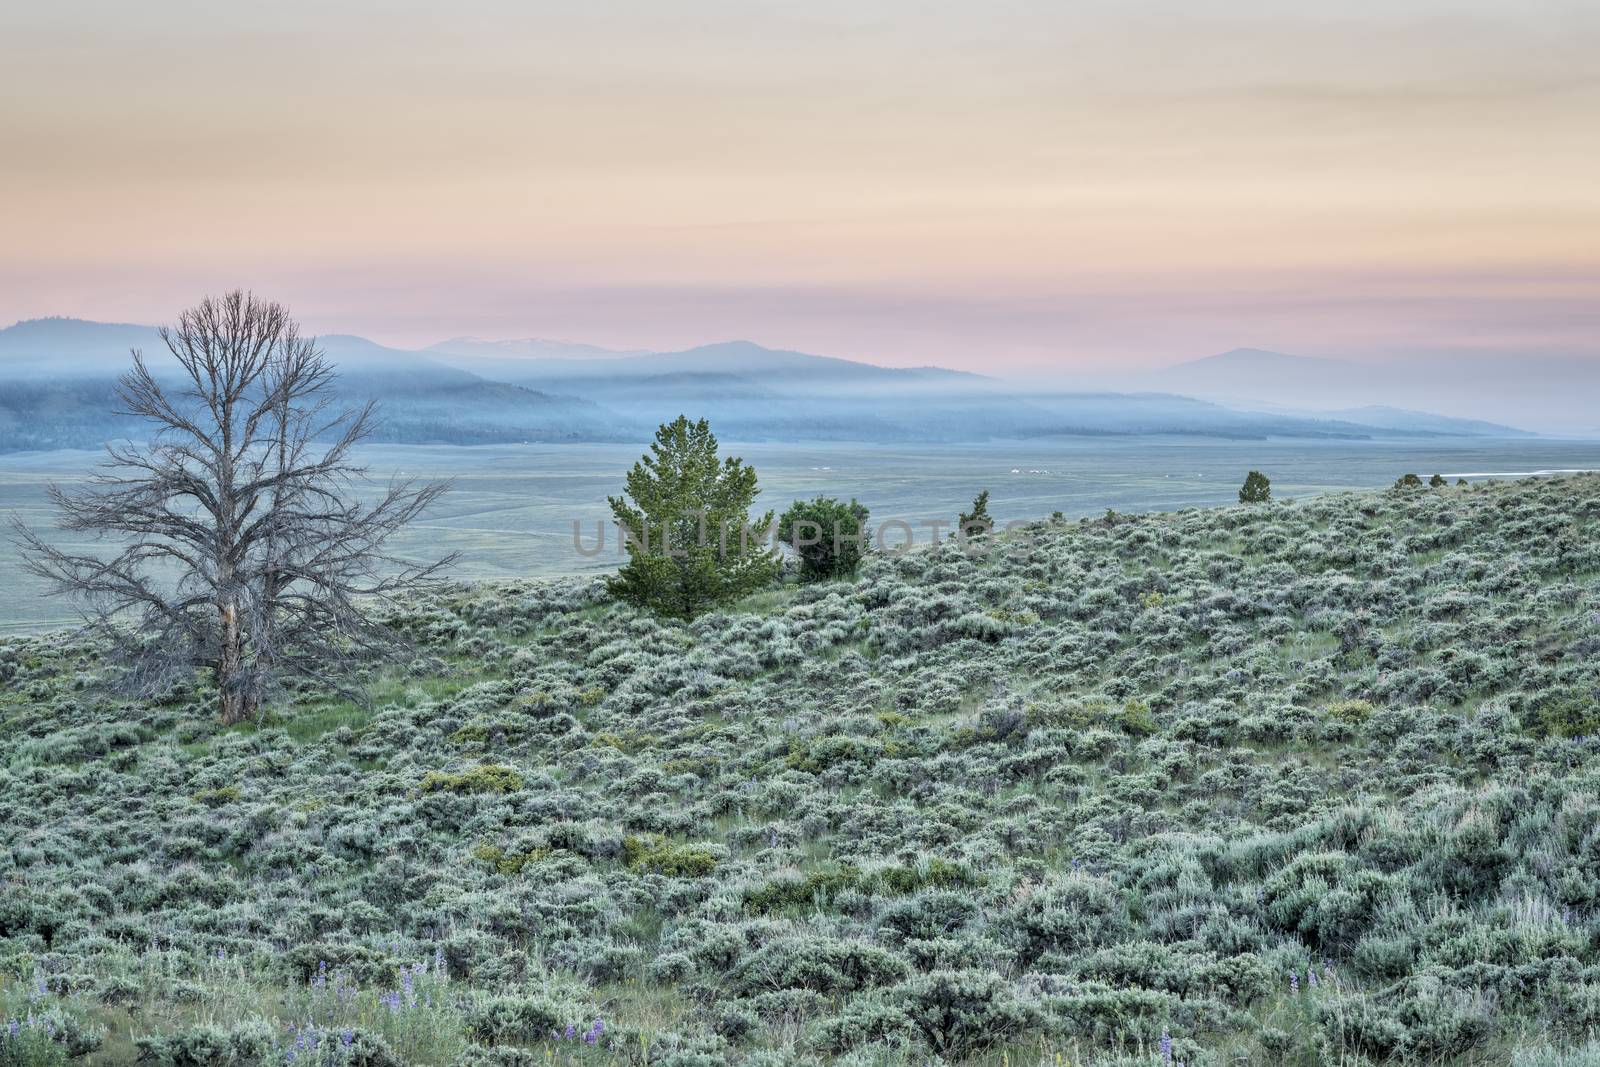 dawn over mountains covered by wildfire smoke - North Park, Colorado near Wyoming border (june 20, 2016)